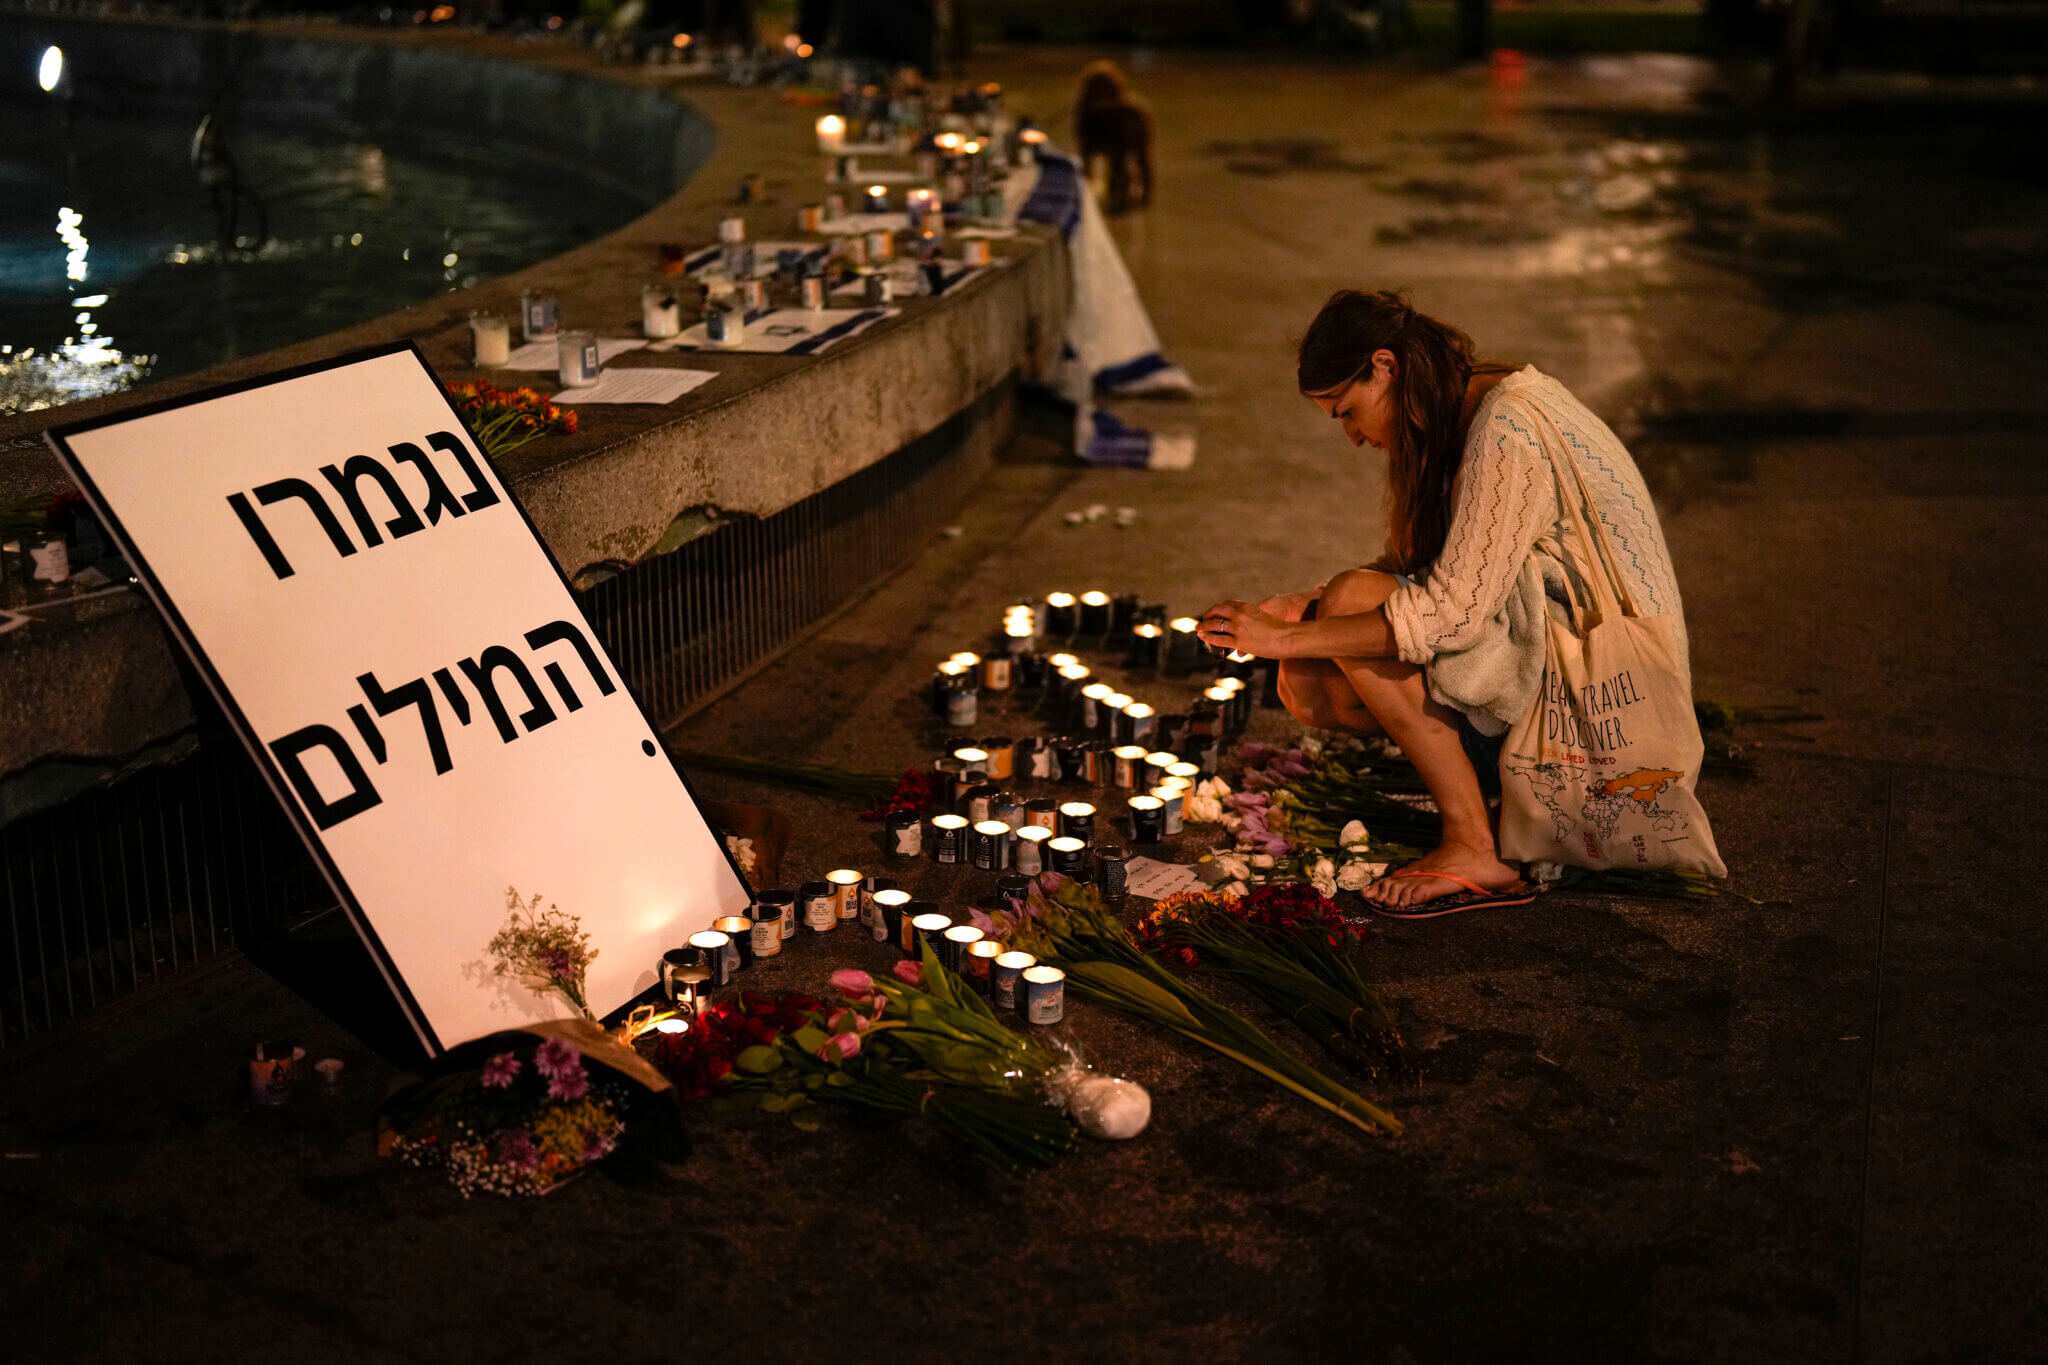 A woman lights candles in honor of victims of the Hamas attacks during a vigil at Dizengoff square in central Tel Aviv, Israel, Friday, Oct. 13, 2023. The sign reads: “Out of Words.” (AP Photo/Francisco Seco)